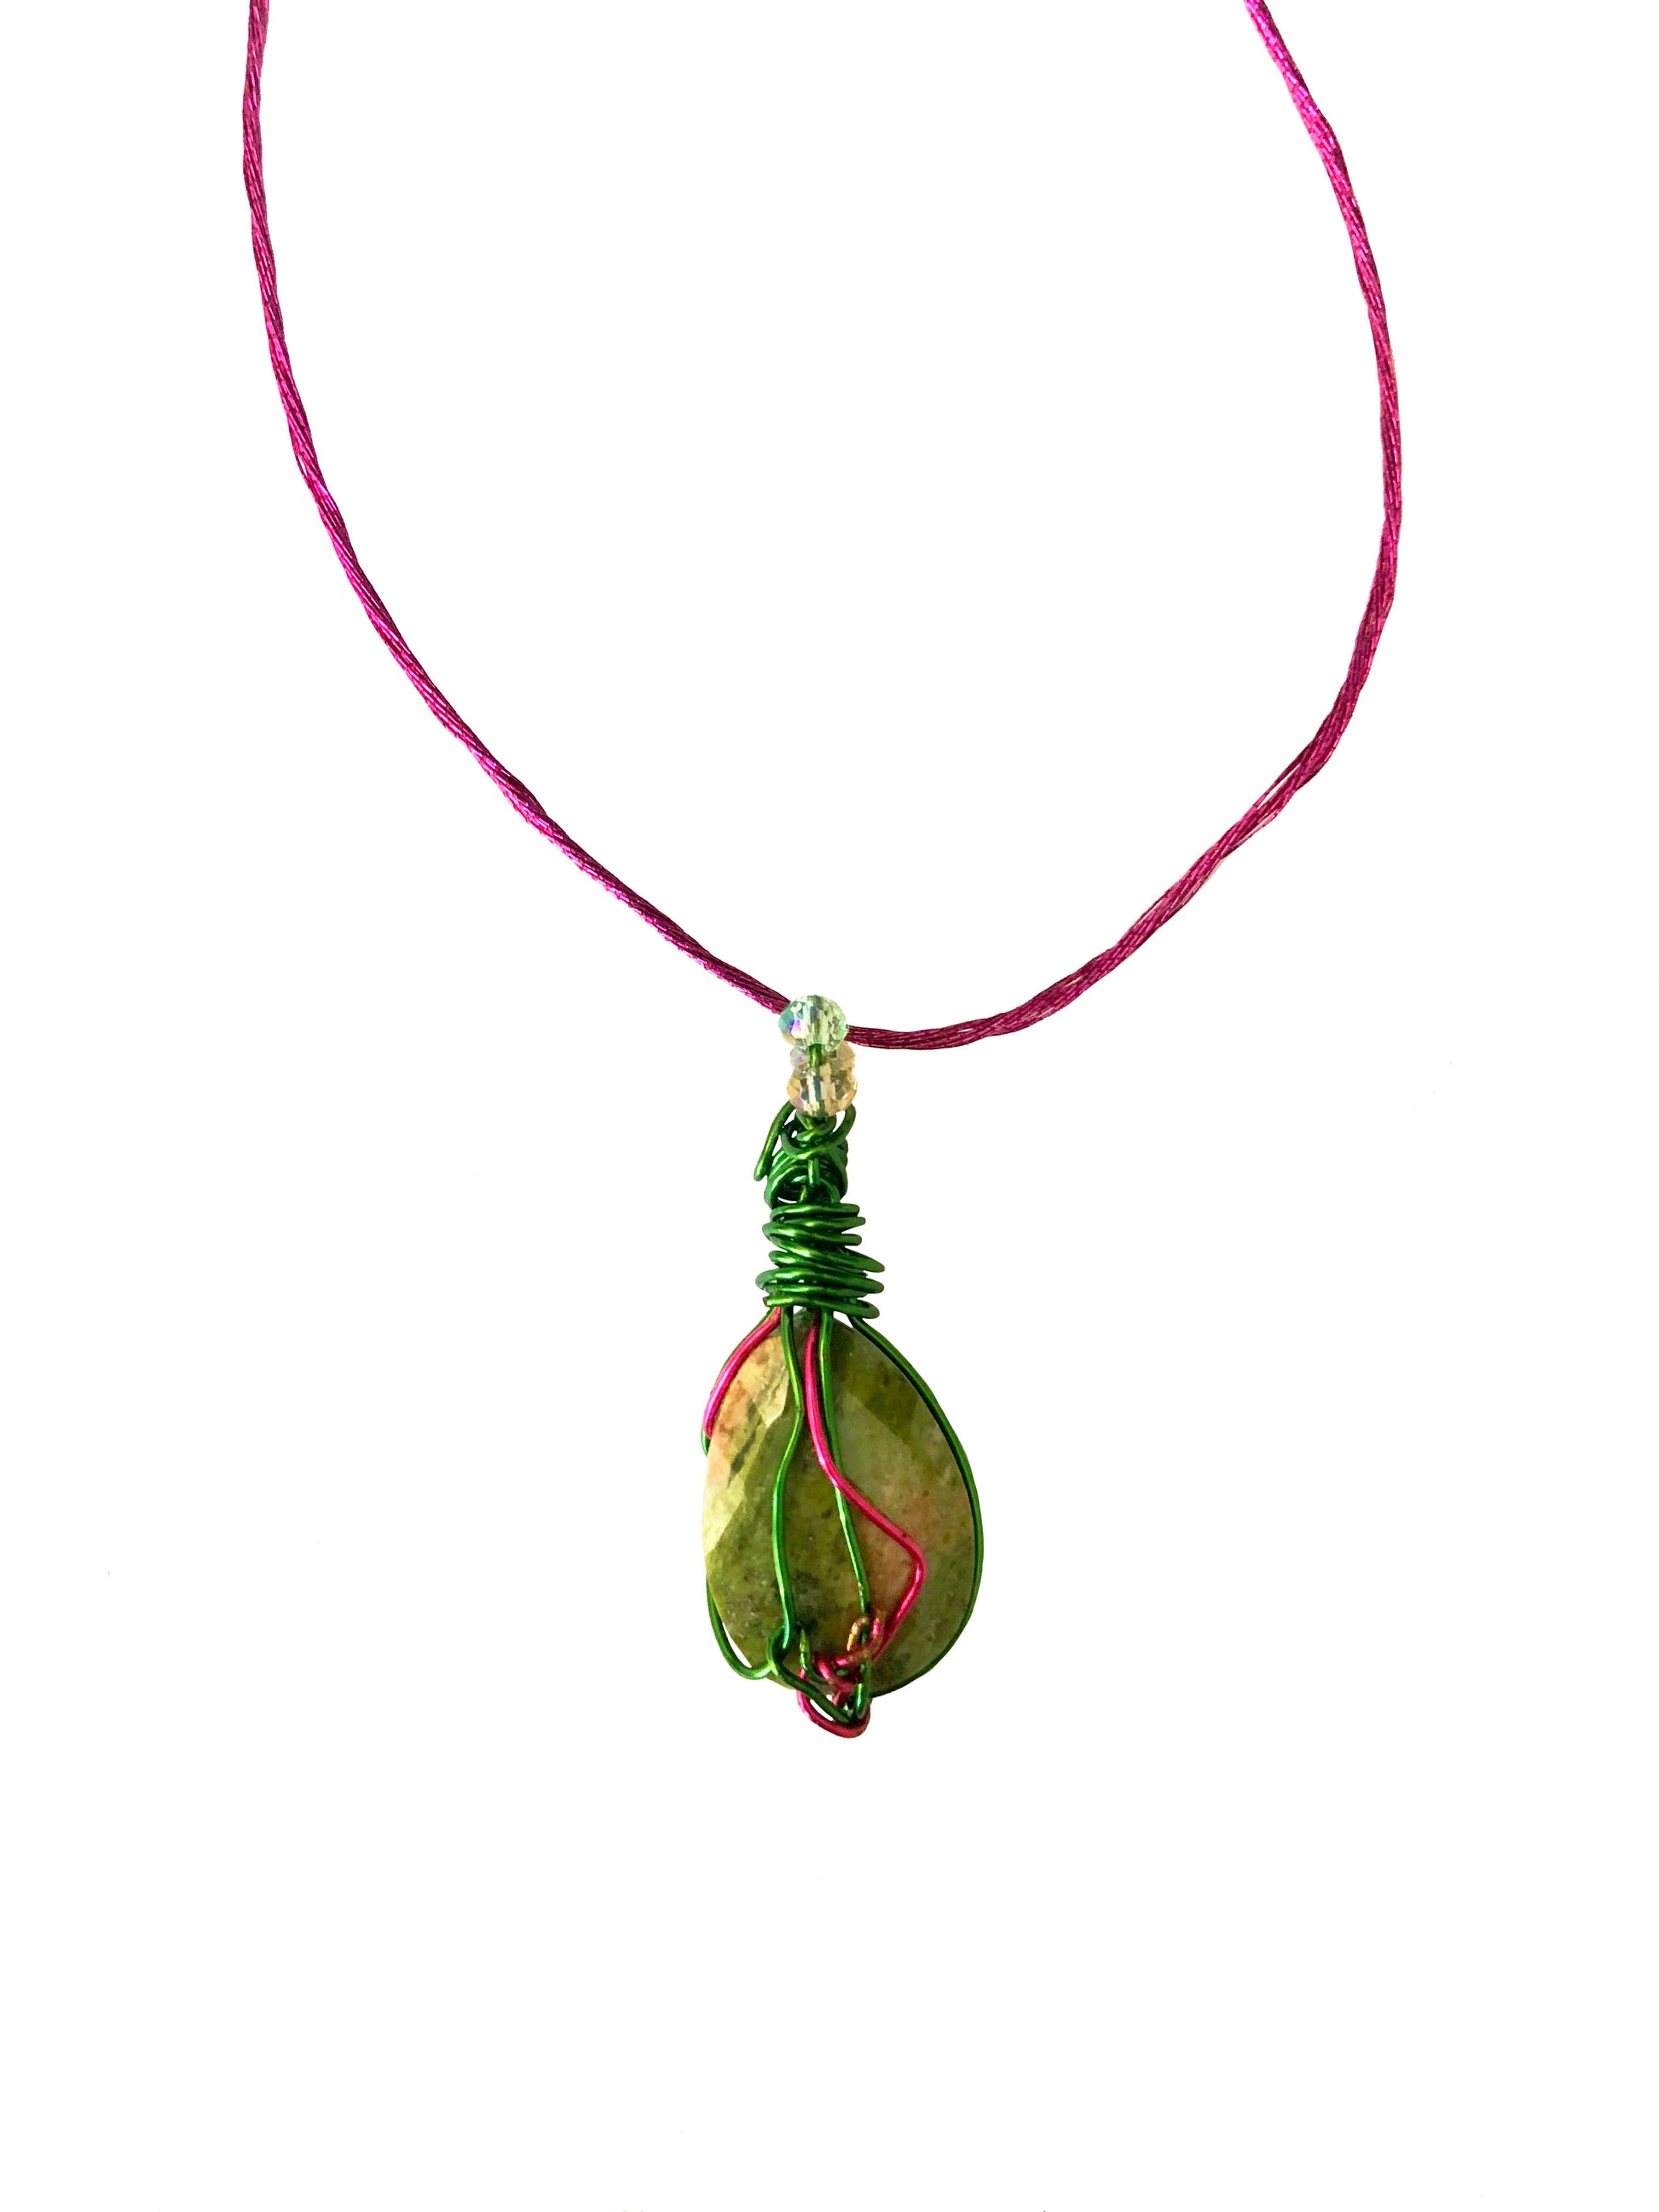 handcrafted green and pink wire wrapped quartz pendant necklace with adjustable sliding knot ties.